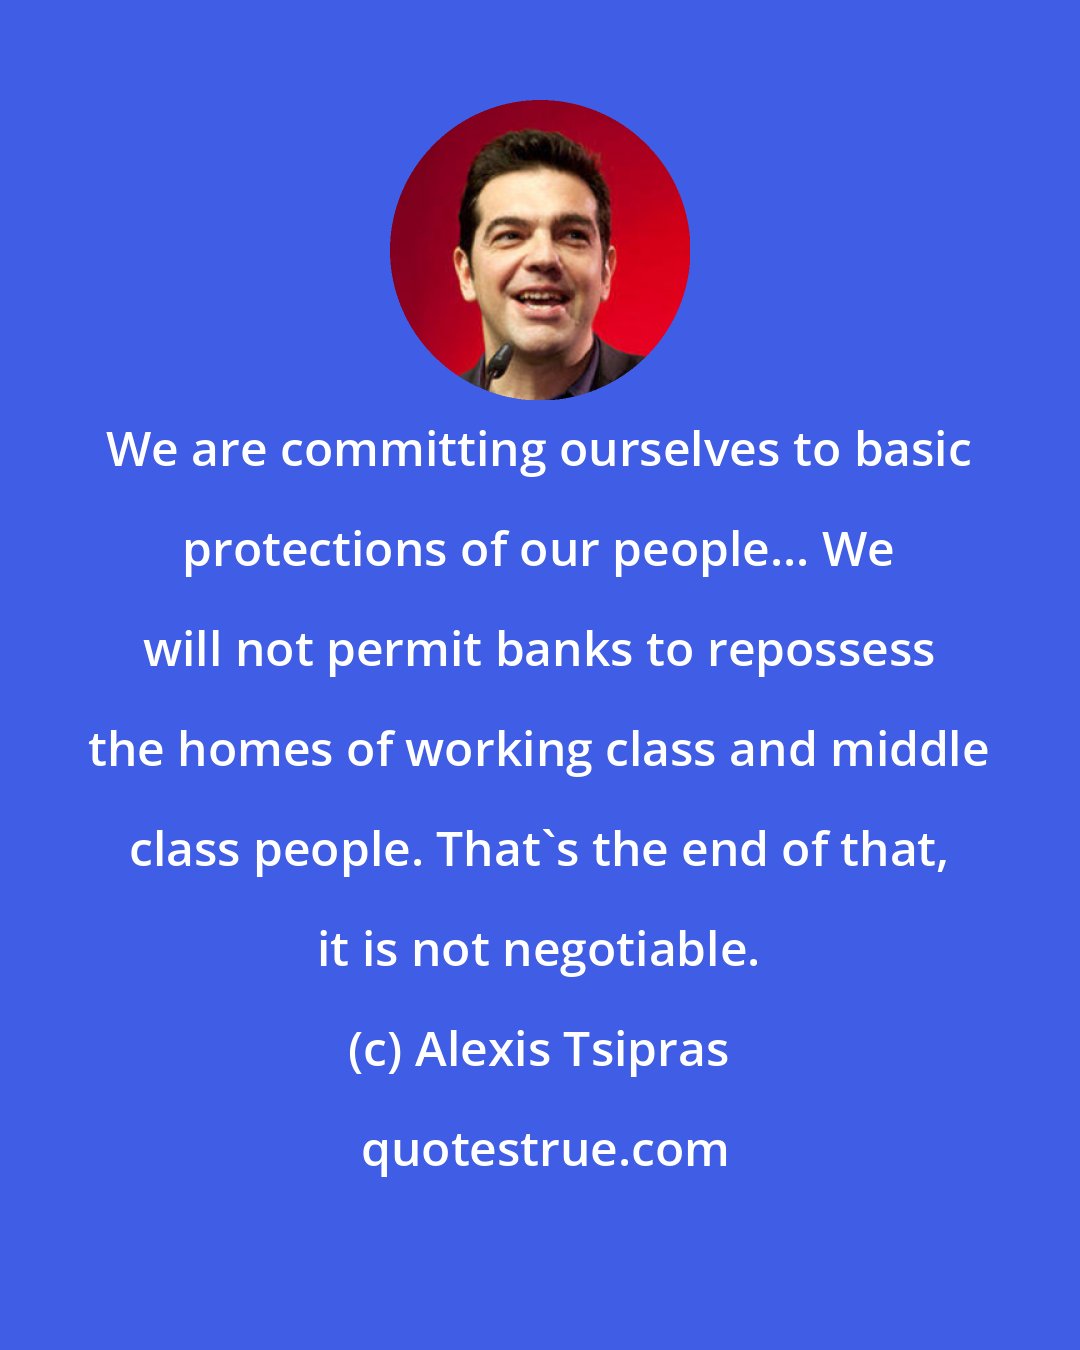 Alexis Tsipras: We are committing ourselves to basic protections of our people... We will not permit banks to repossess the homes of working class and middle class people. That's the end of that, it is not negotiable.